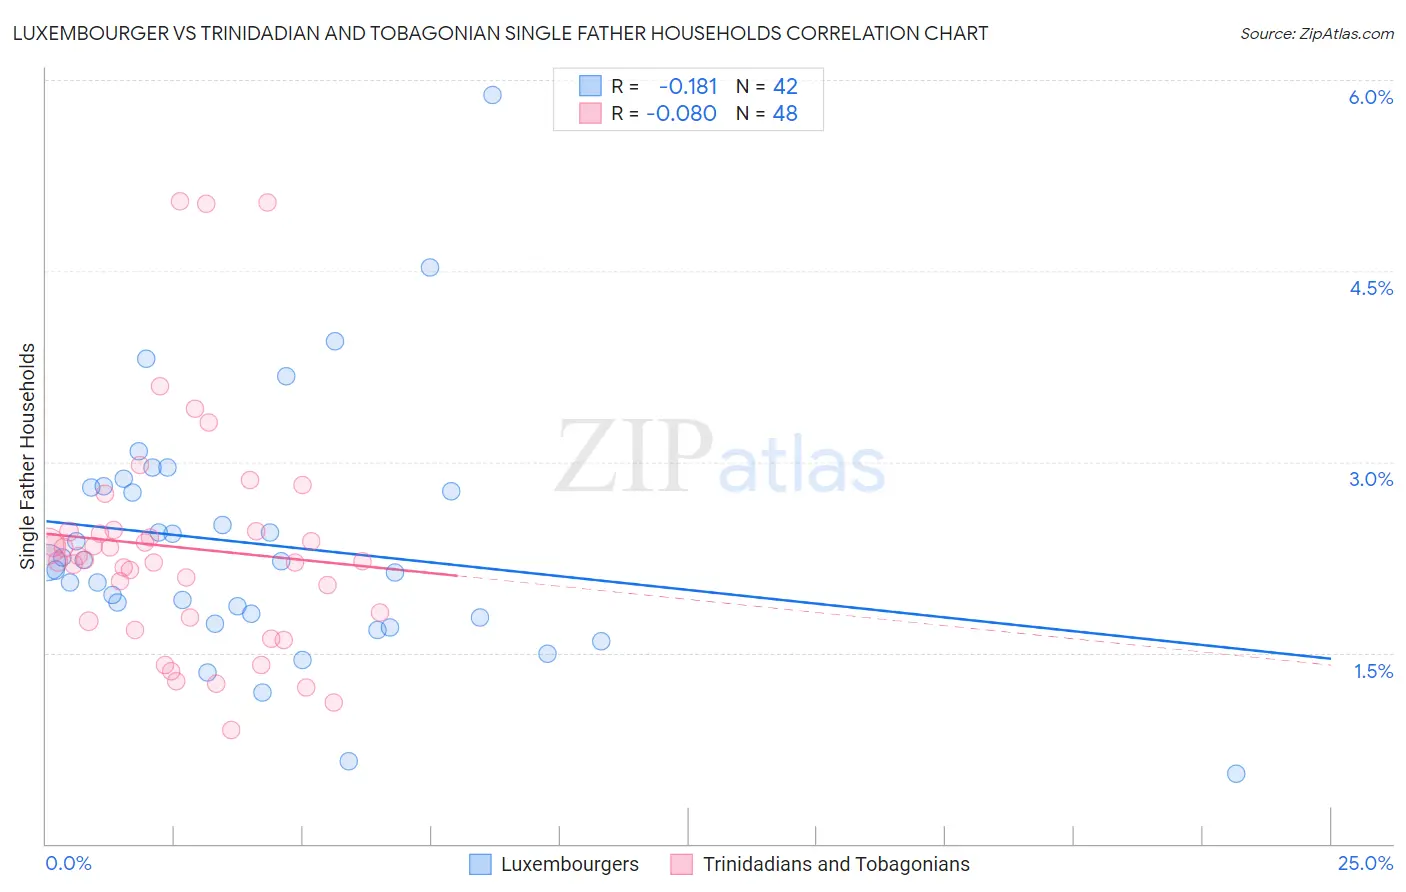 Luxembourger vs Trinidadian and Tobagonian Single Father Households